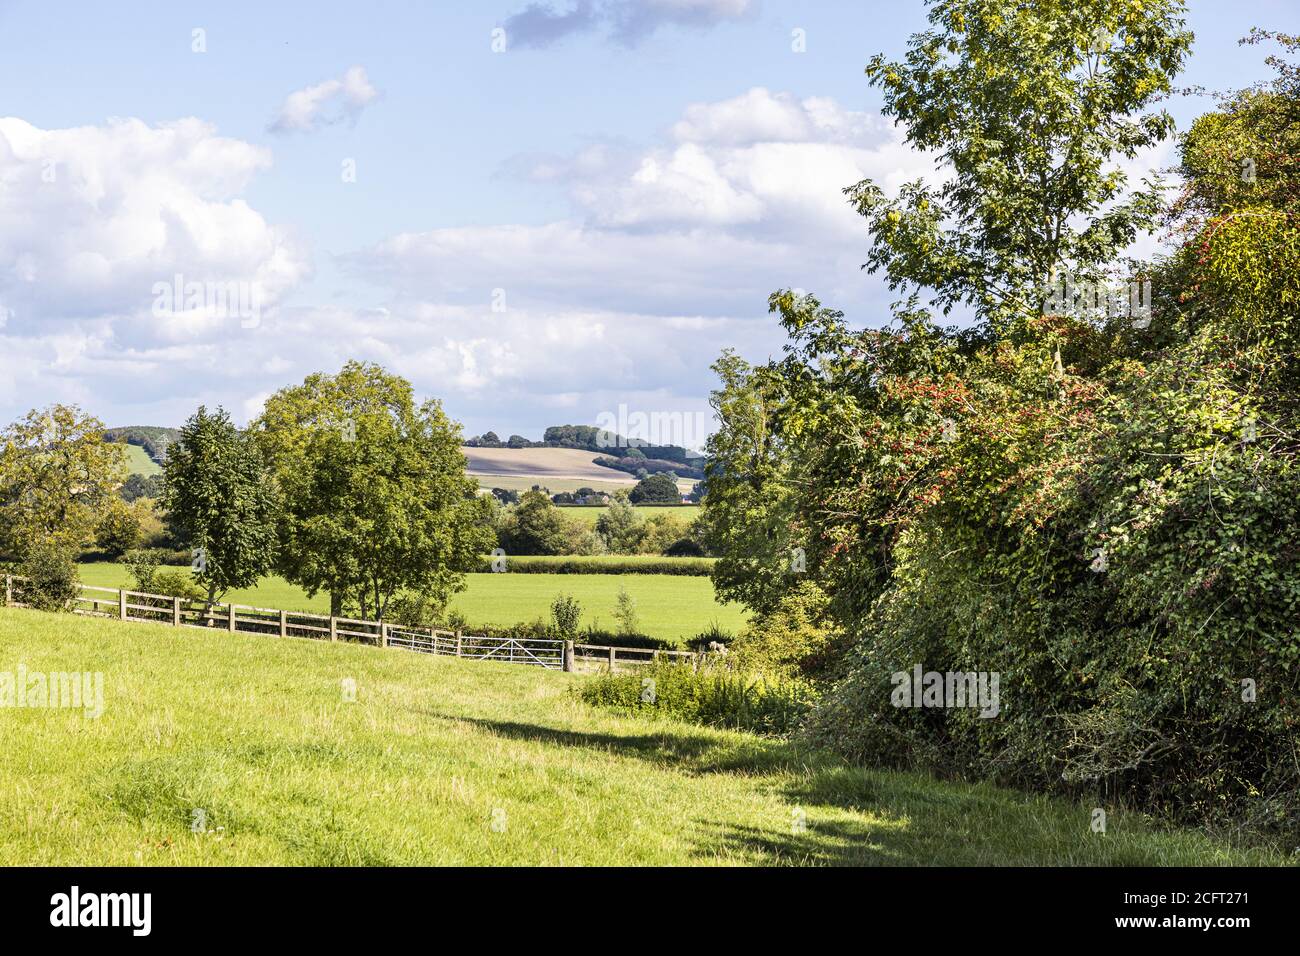 An early autumn landscape near the Severn Vale village of Maisemore, Gloucestershire UK Stock Photo